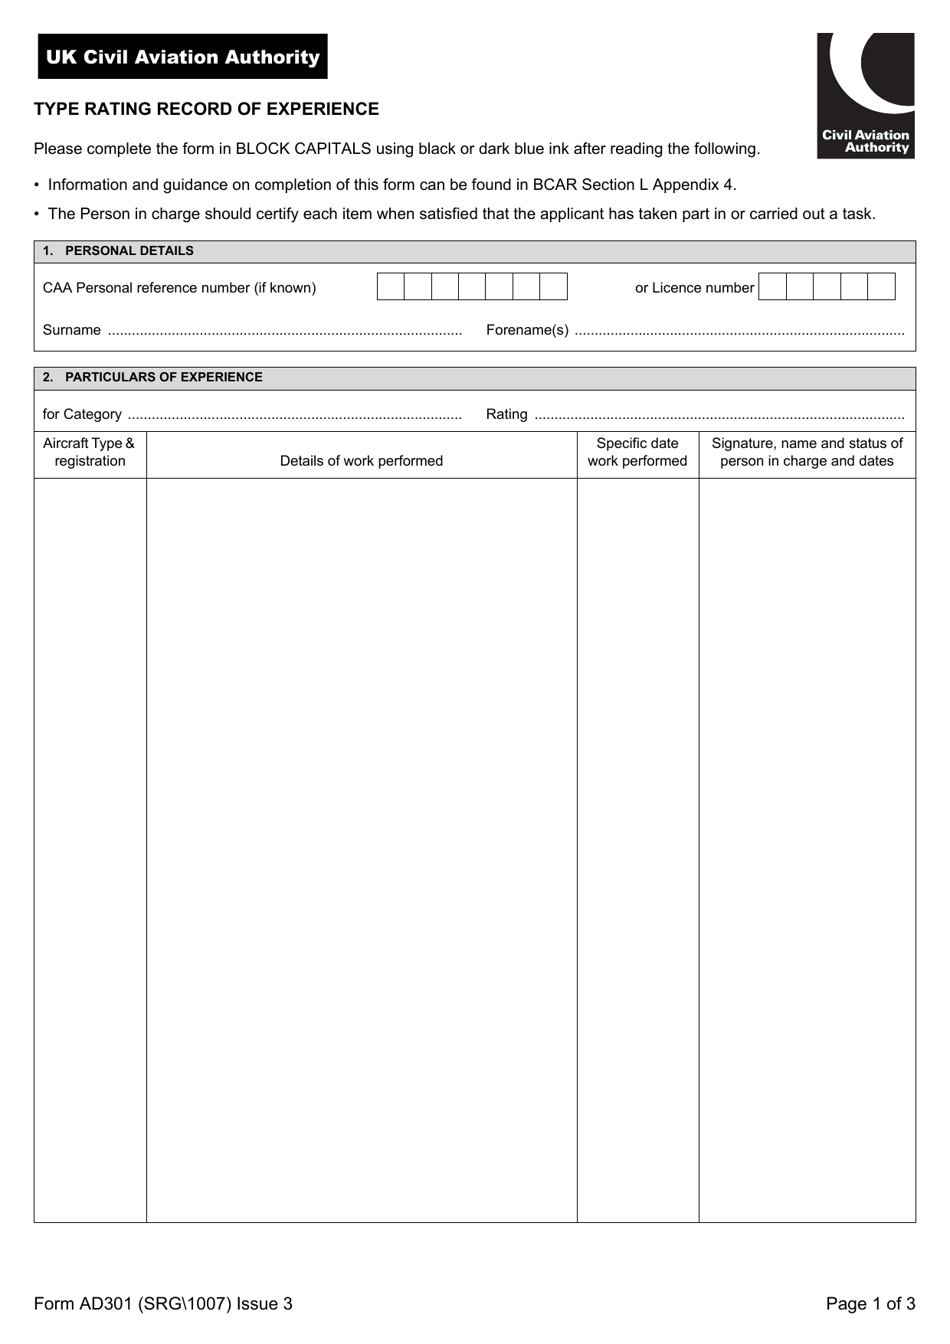 Form SRG 1007 (AD301) Type Rating Record of Experience - United Kingdom, Page 1